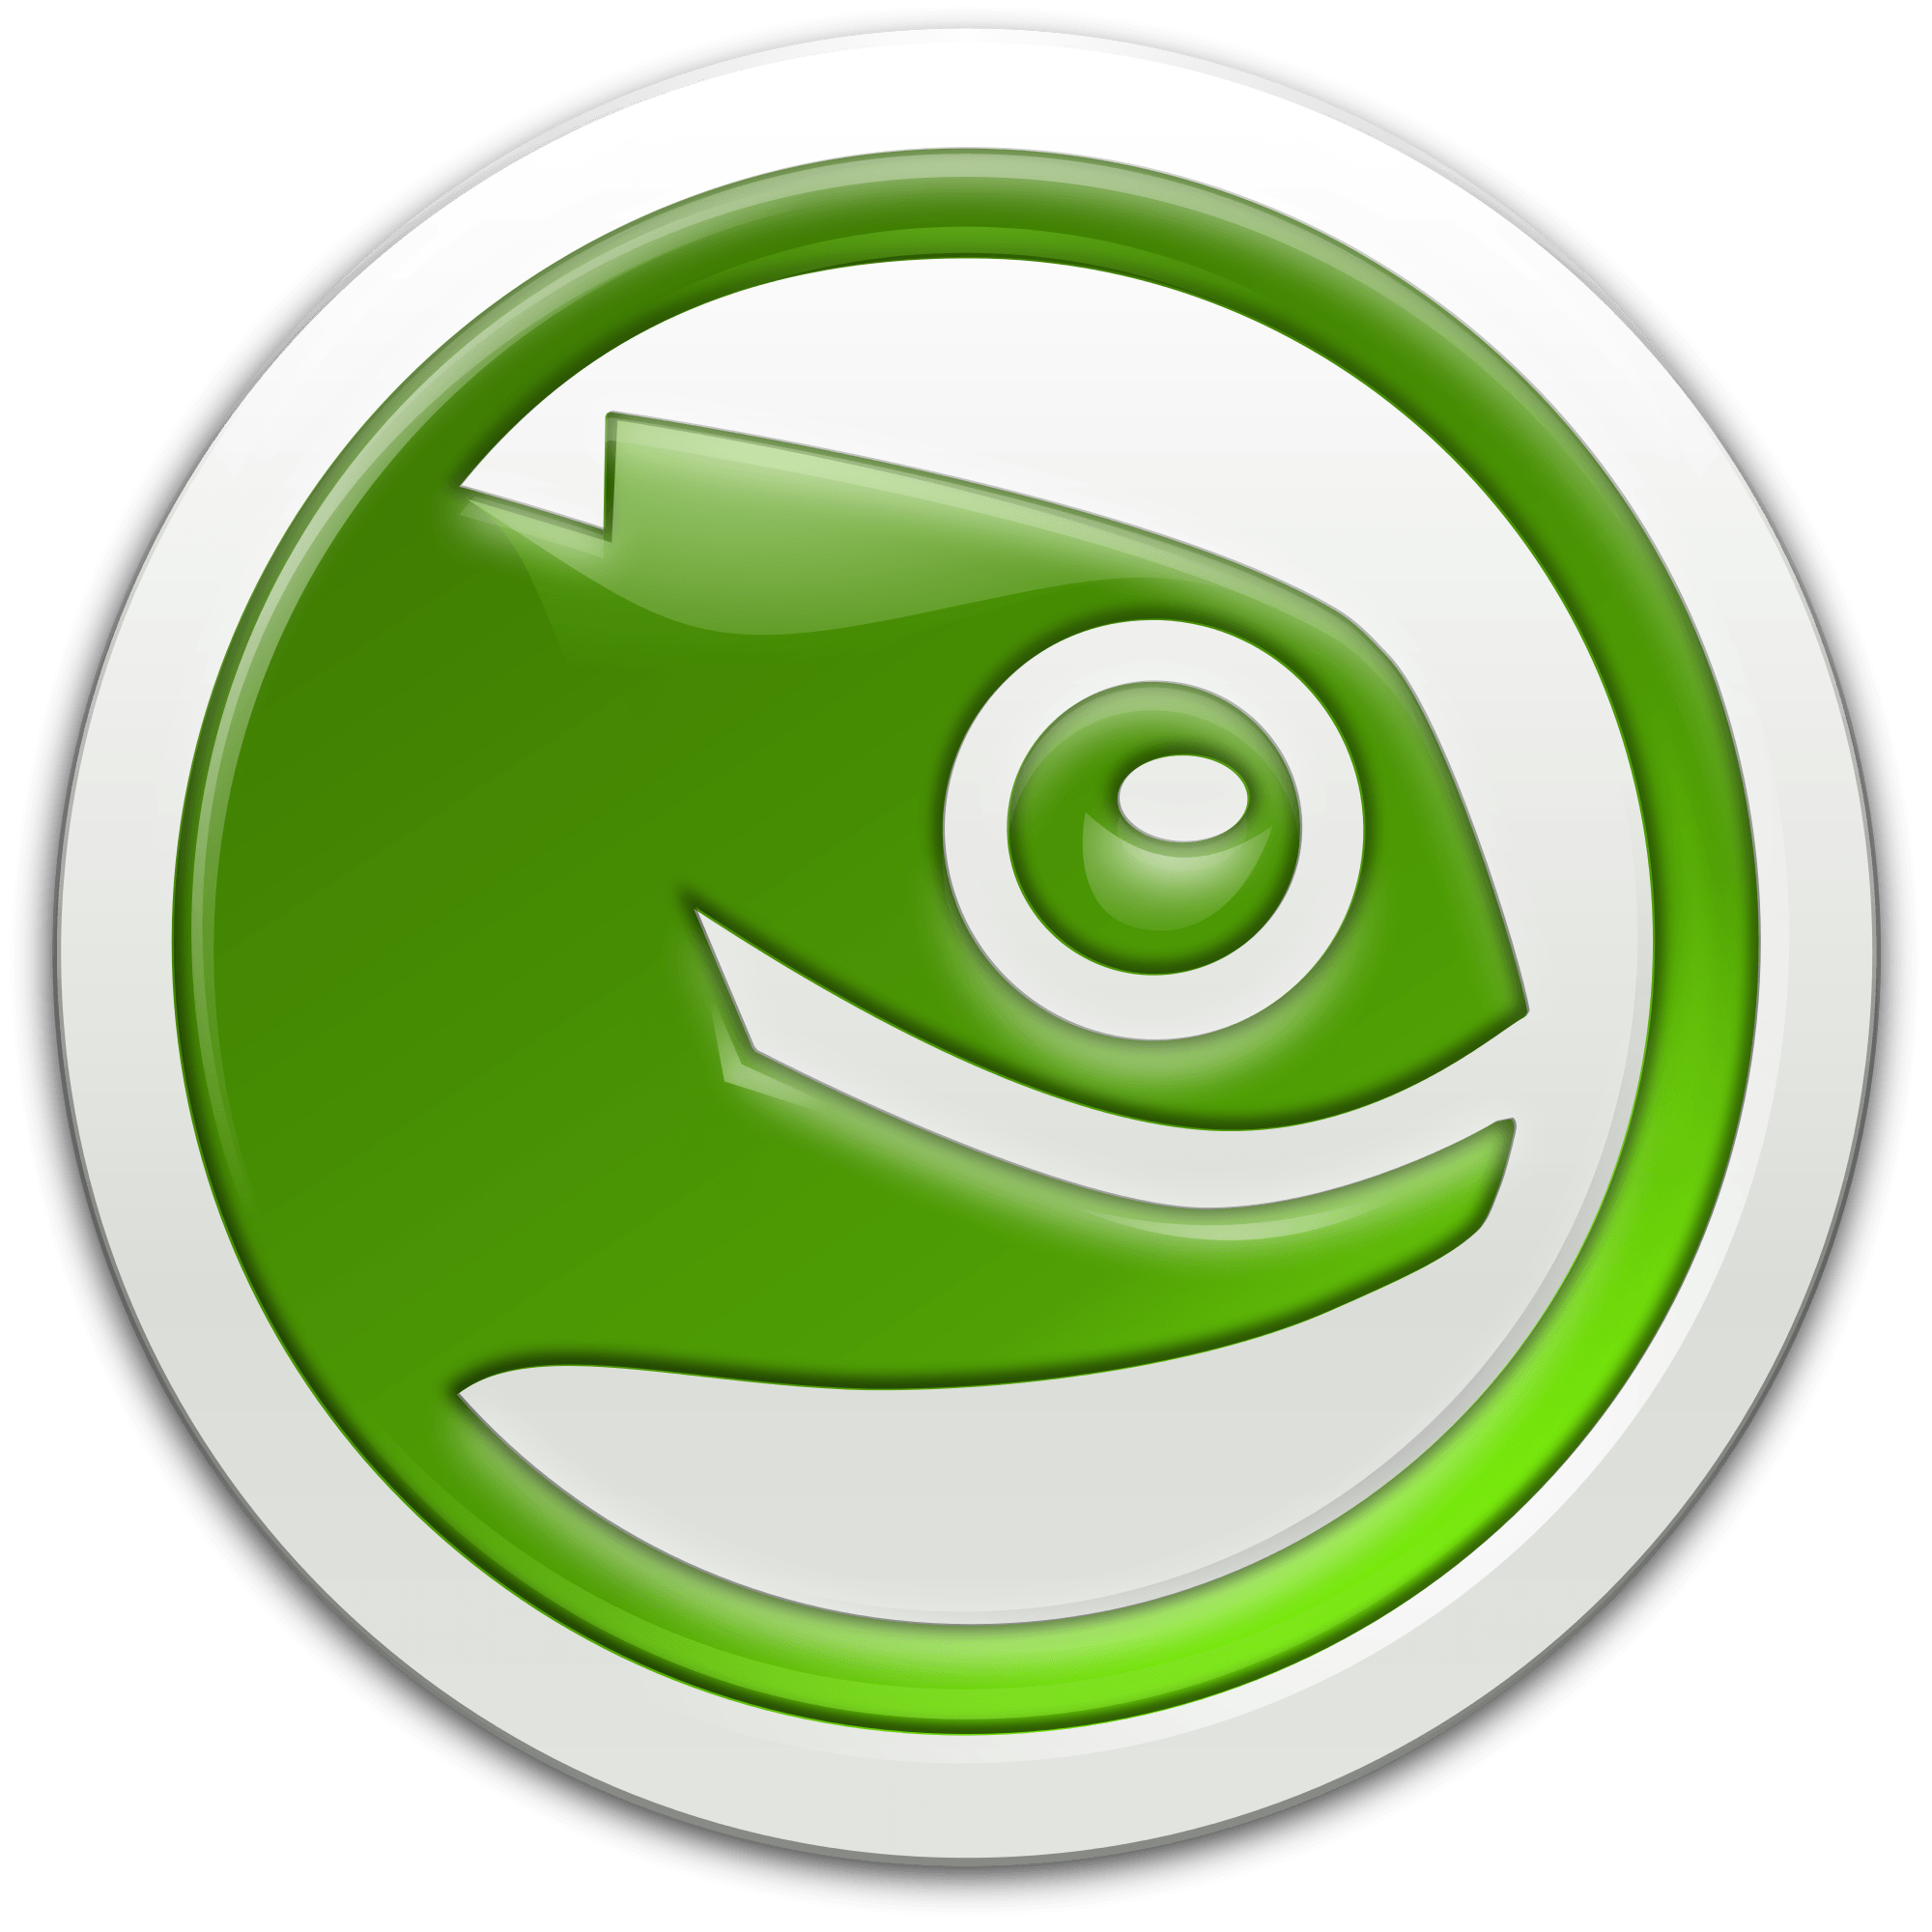 Suse Logo - File:OpenSUSE Geeko button bling7.svg - Wikimedia Commons